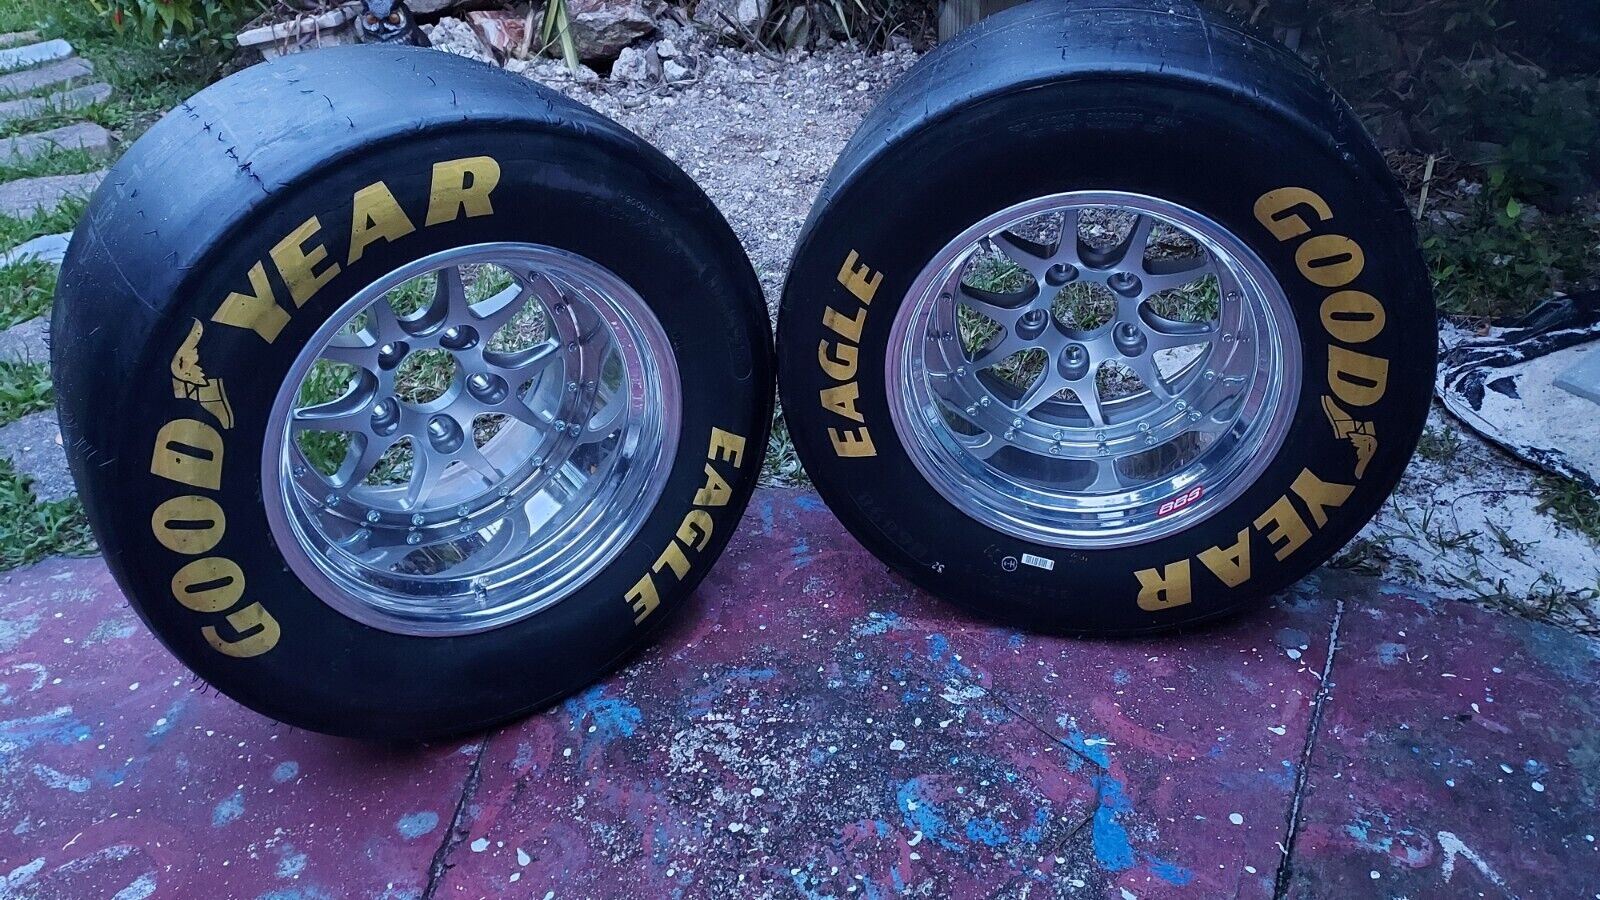 2 Tire Eagle Racing Special. Good Year. 28.5X14.5-16 Tires for DAYTONA racing